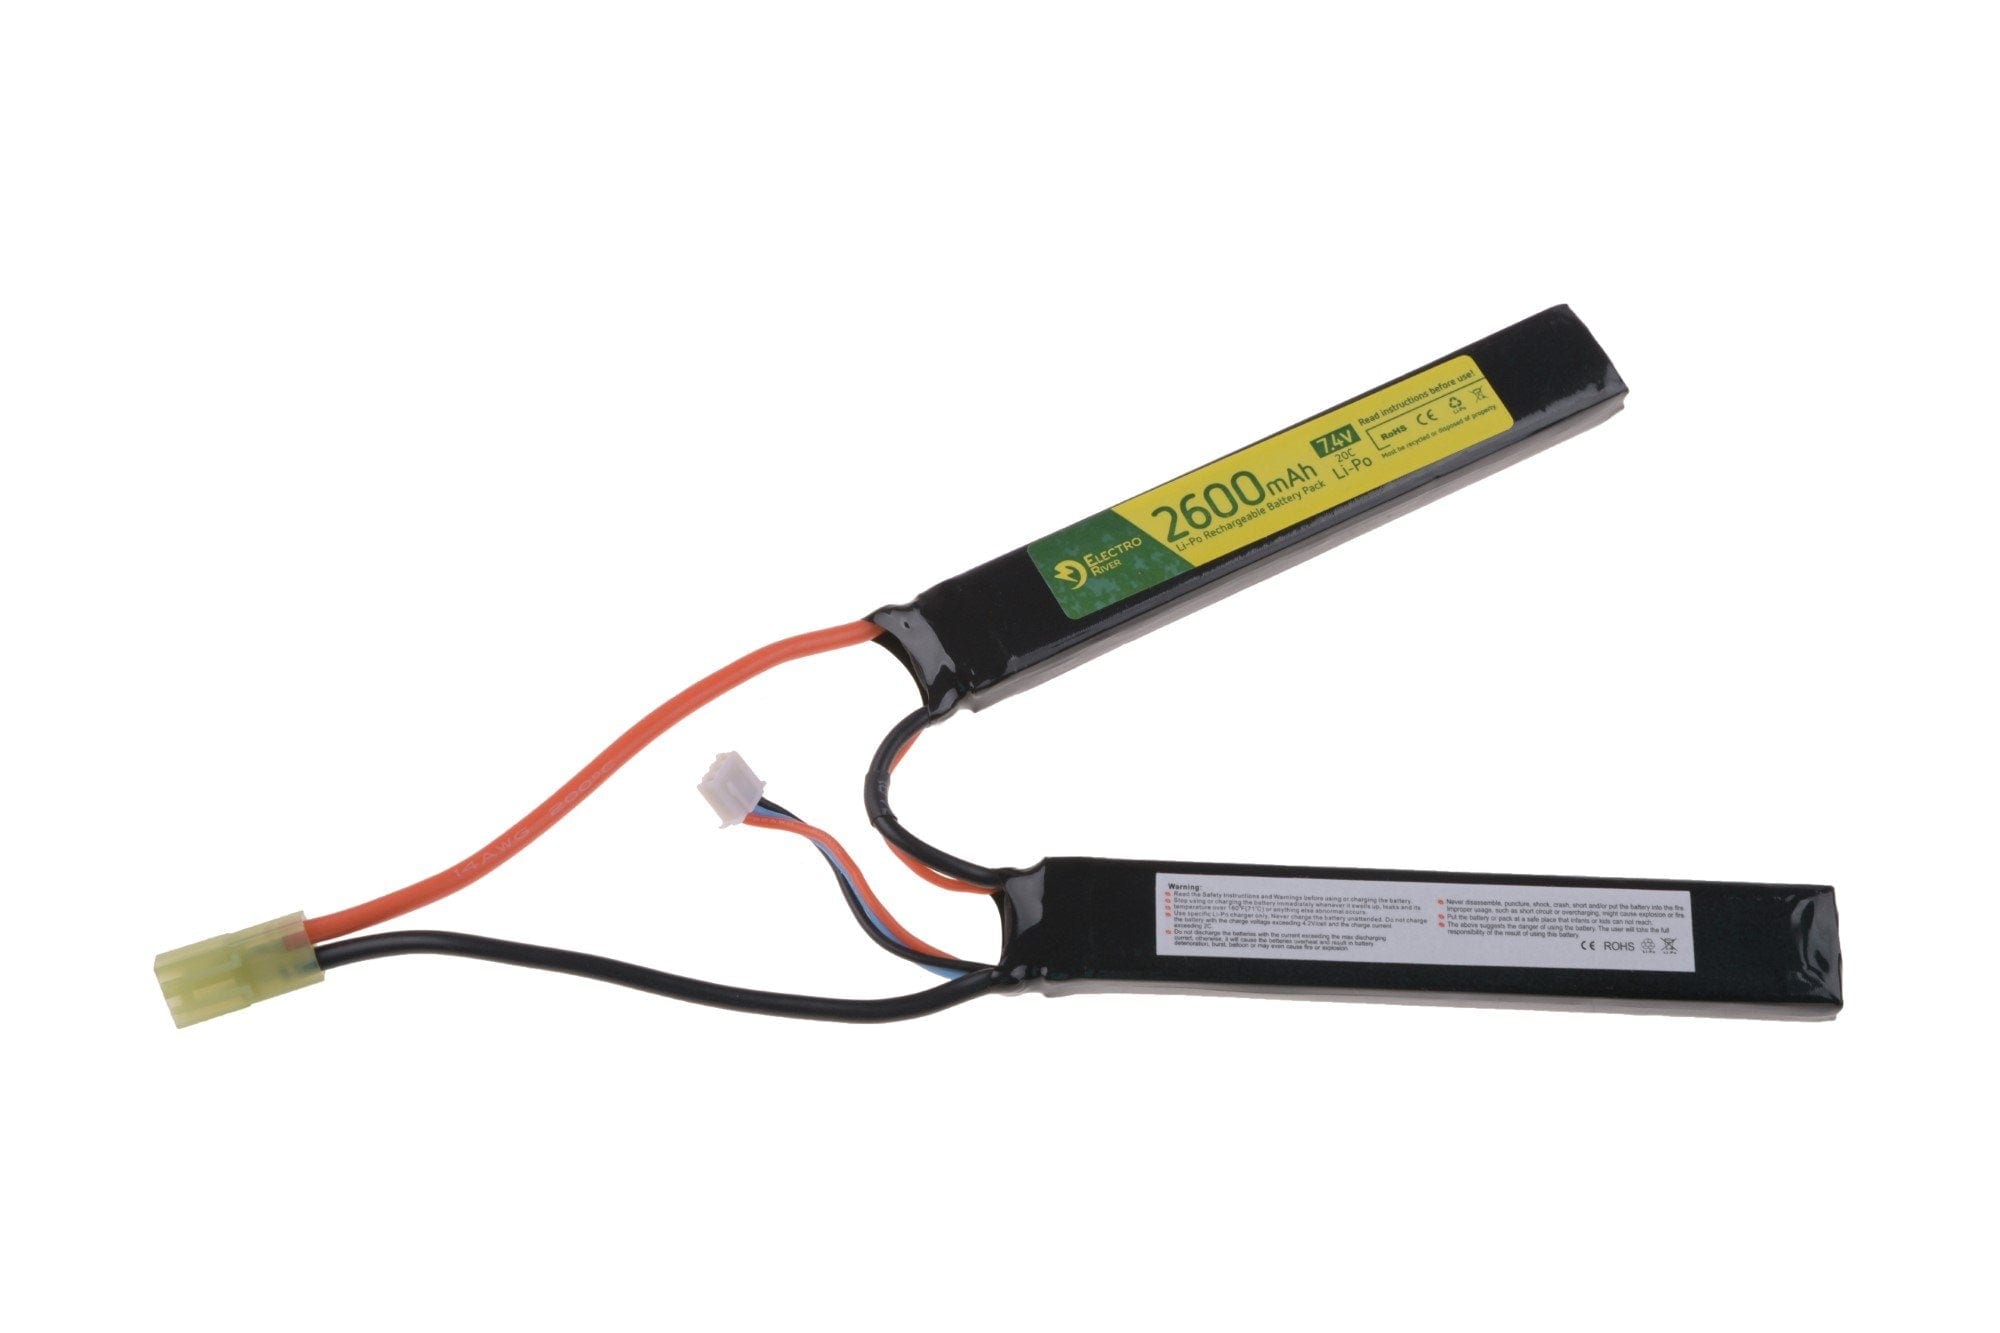 LiPo 7.4V 2600mAh 20C Battery - Butterfly by Electro River on Airsoft Mania Europe